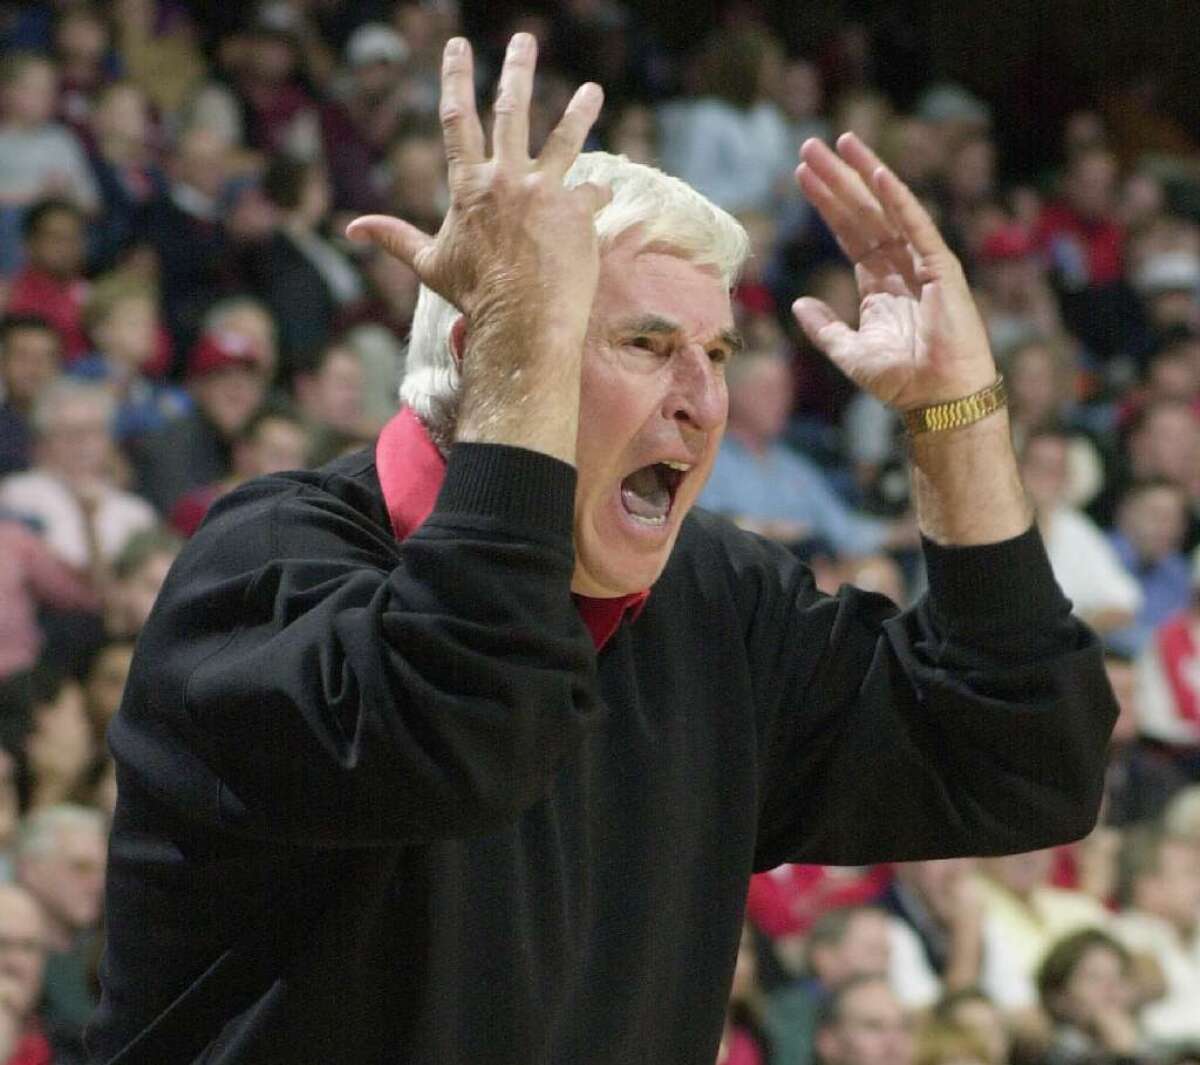 College basketball coach Bobby Knight lost his job at Indiana University after he grabbed a player by the neck during practice. A new report in Pediatrics says bullying of young athletes by coaches is more common than you might think.